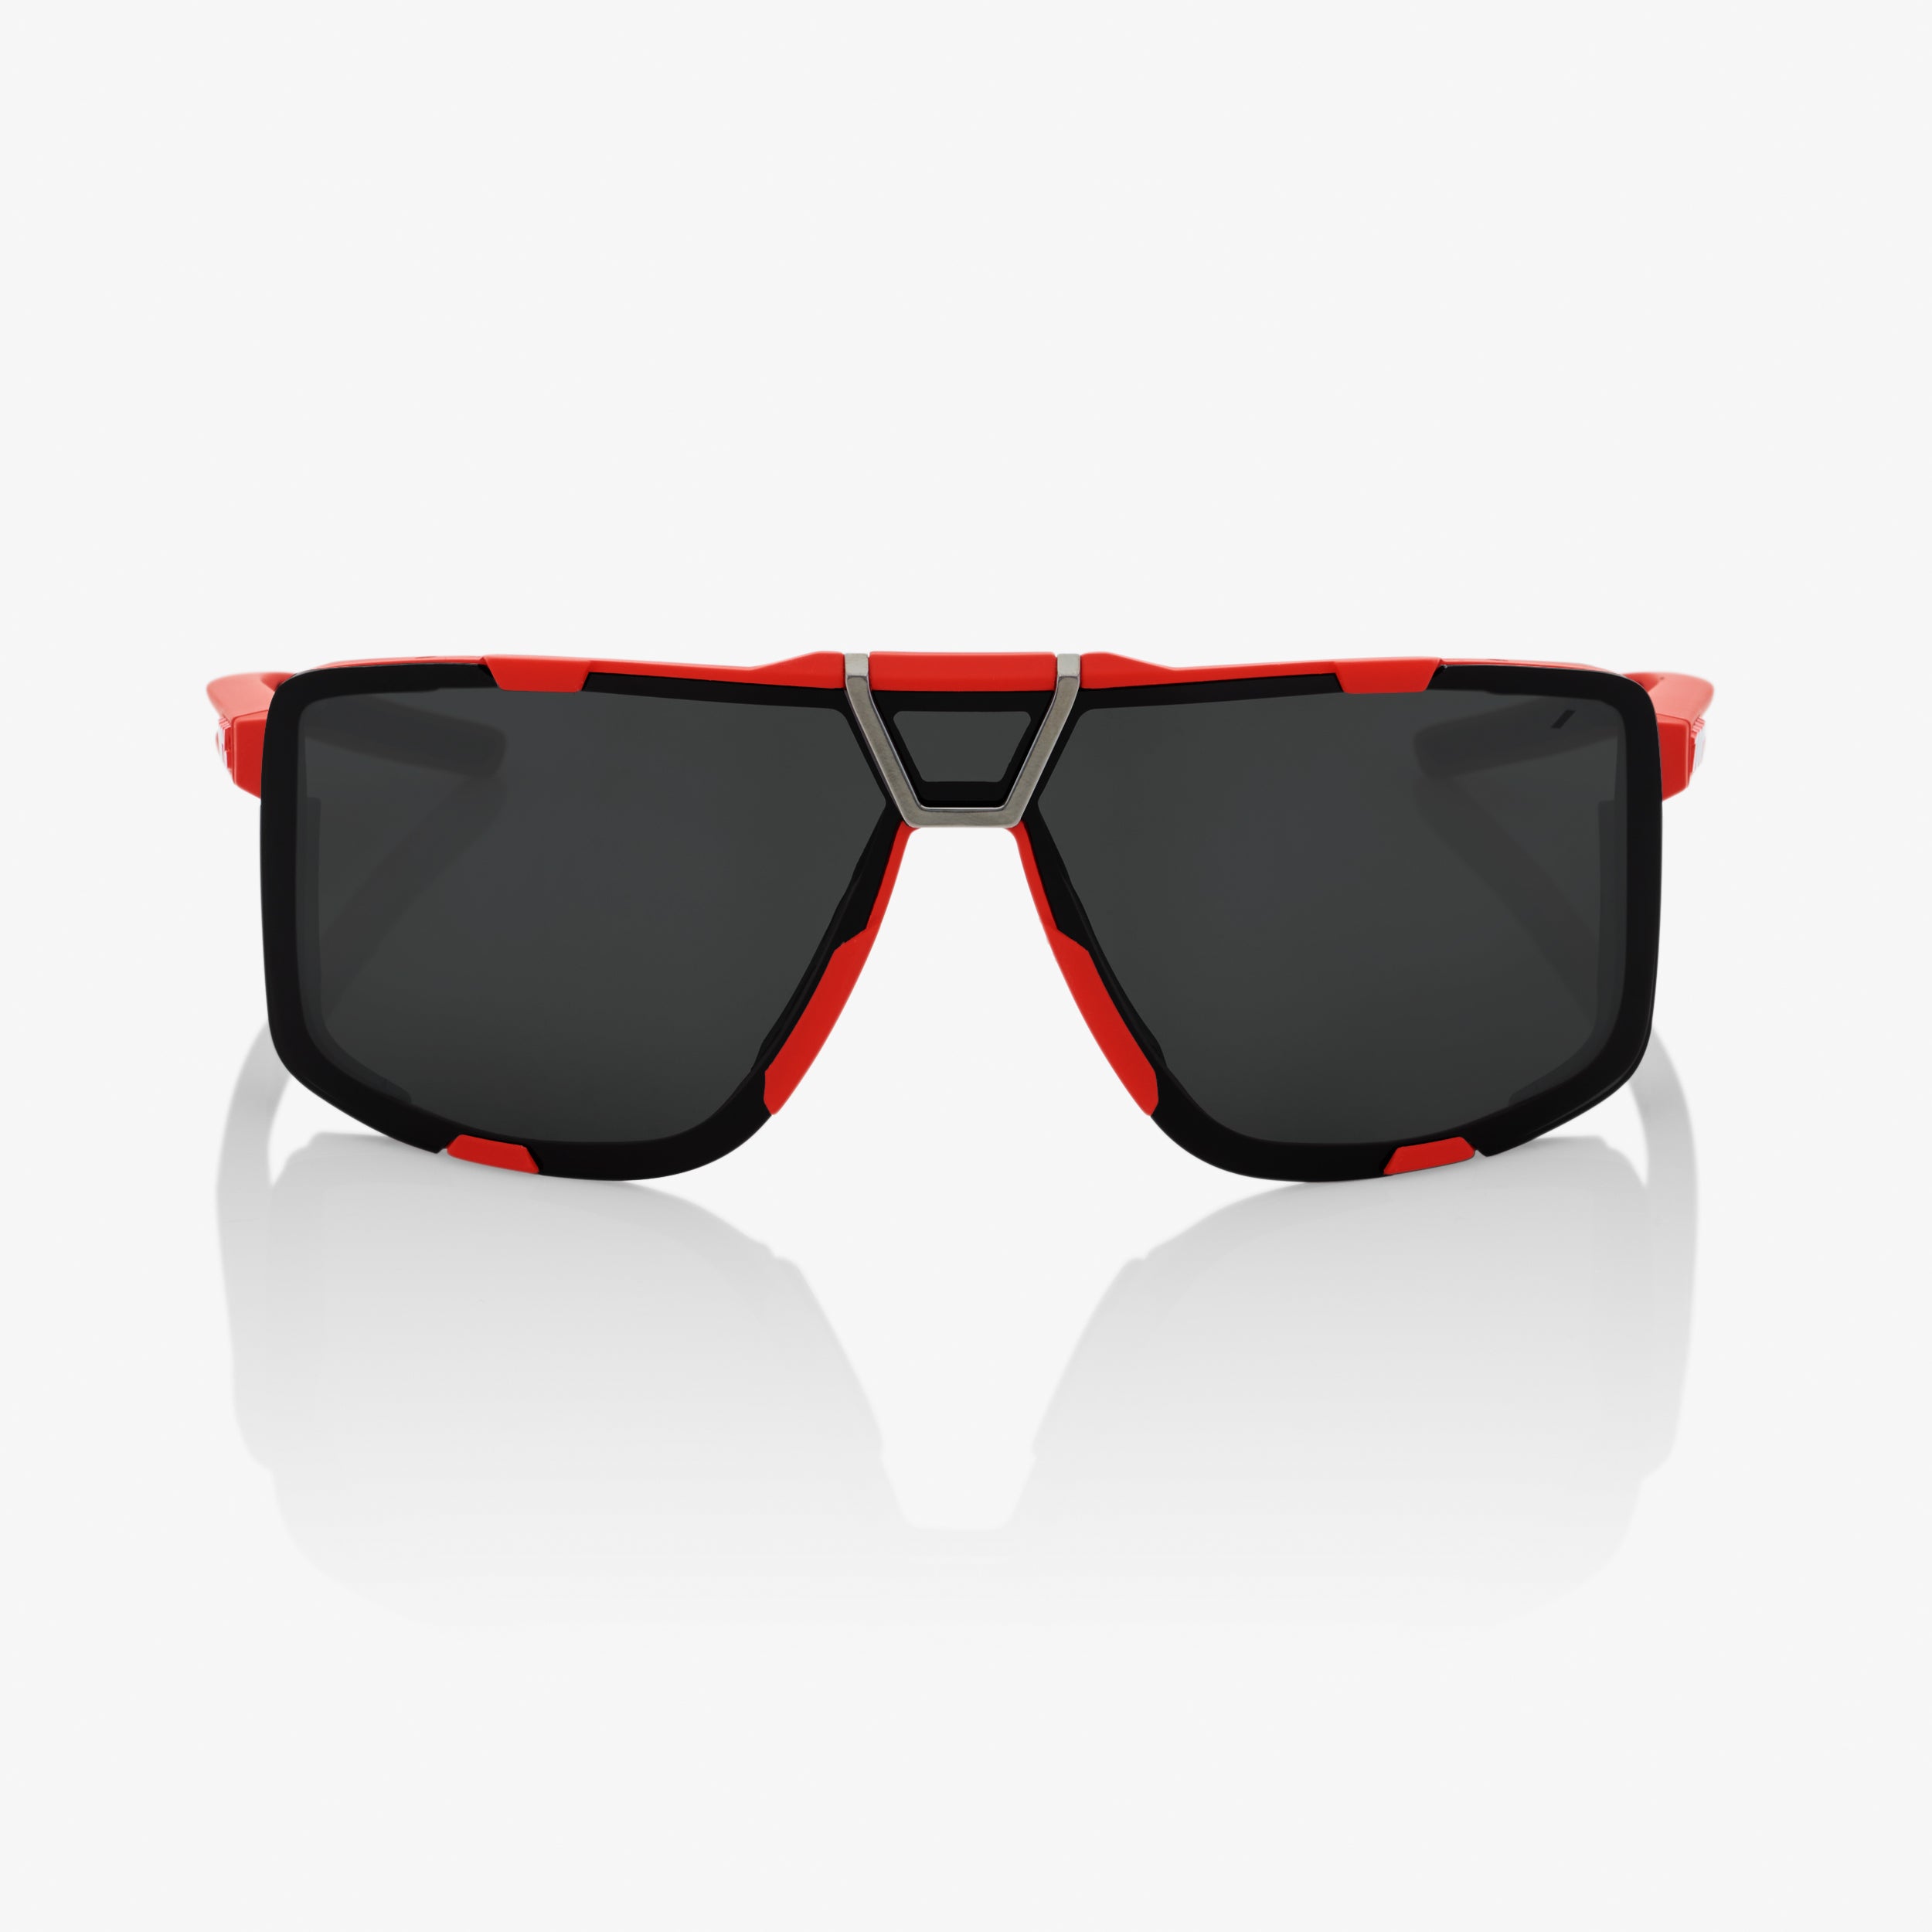 EASTCRAFT Soft Tact Red Black Mirror Lens - Secondary